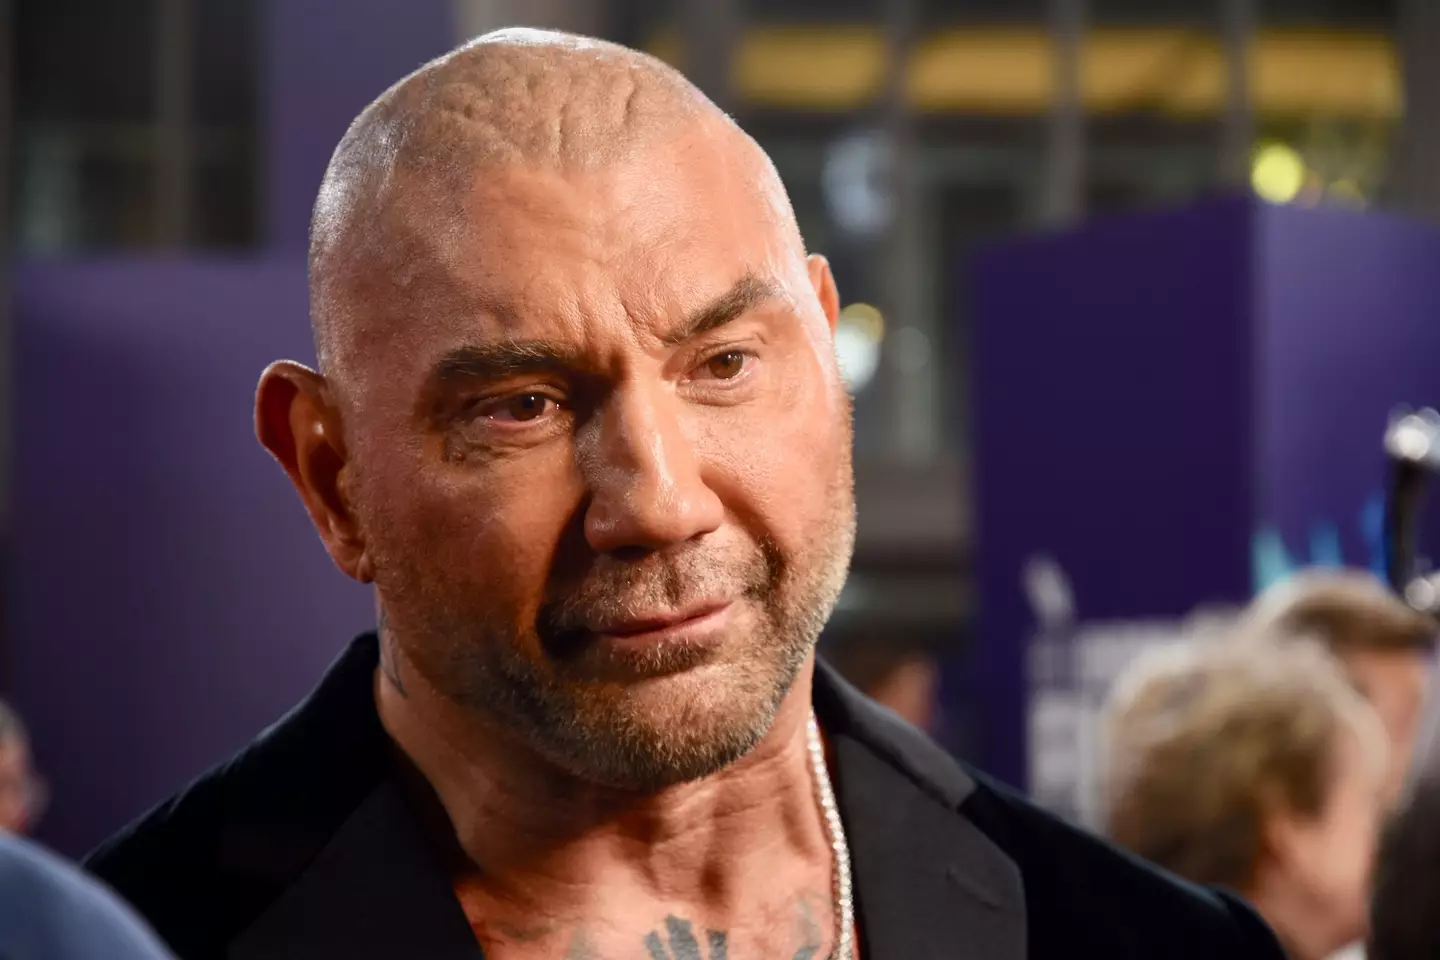 Dave Bautista. at the Glass Onion: A Knives Out Mystery premiere, BFI London Film Festival, Royal Festival Hall, Southbank, London. UK.